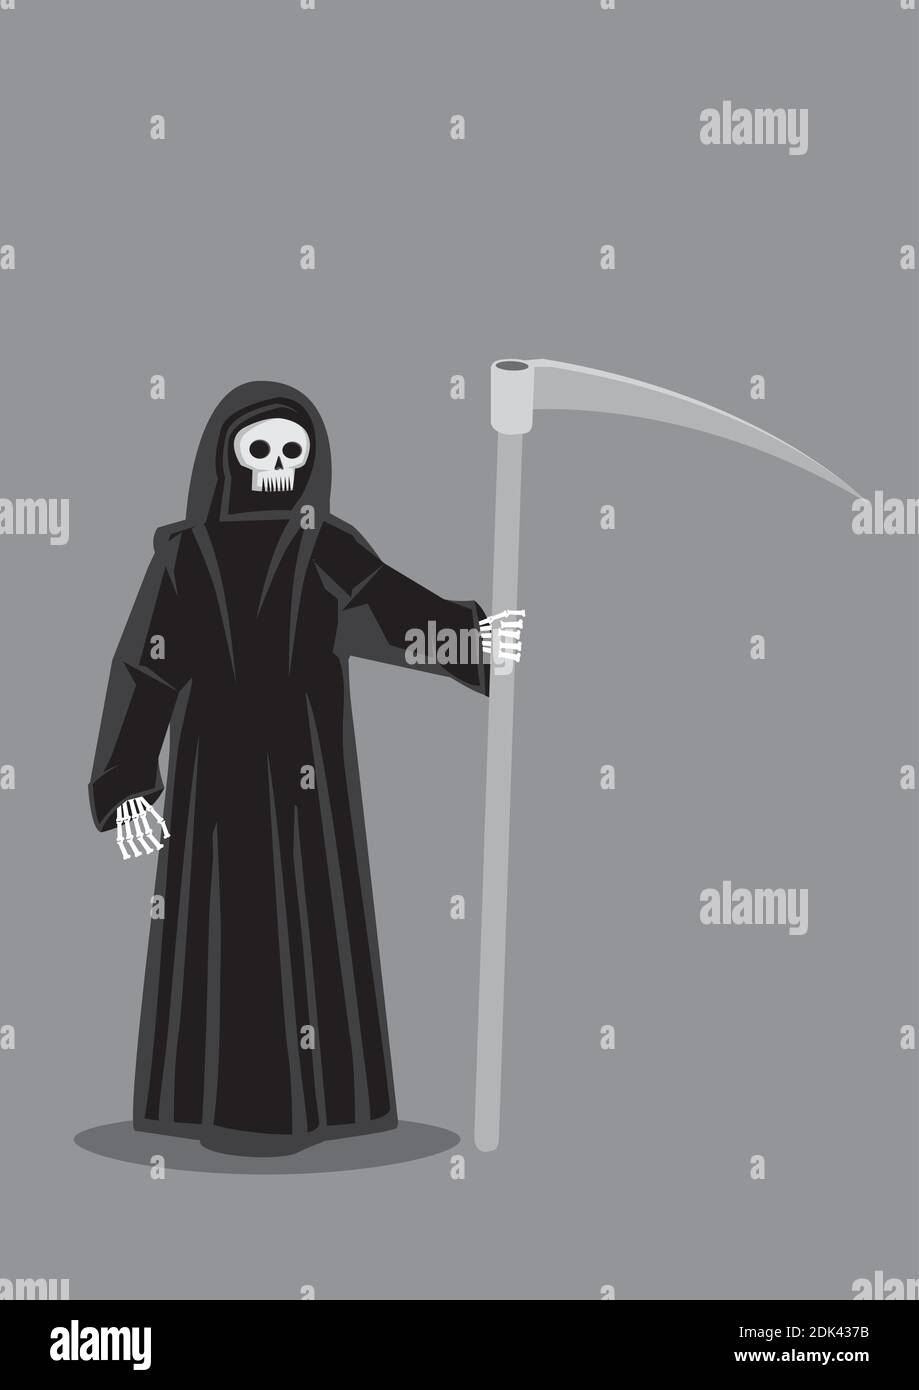 Vector cartoon illustration of Grim Reaper, character personification of Death, skeleton dressed in black hooded cloak costume and carrying a scythe i Stock Vector